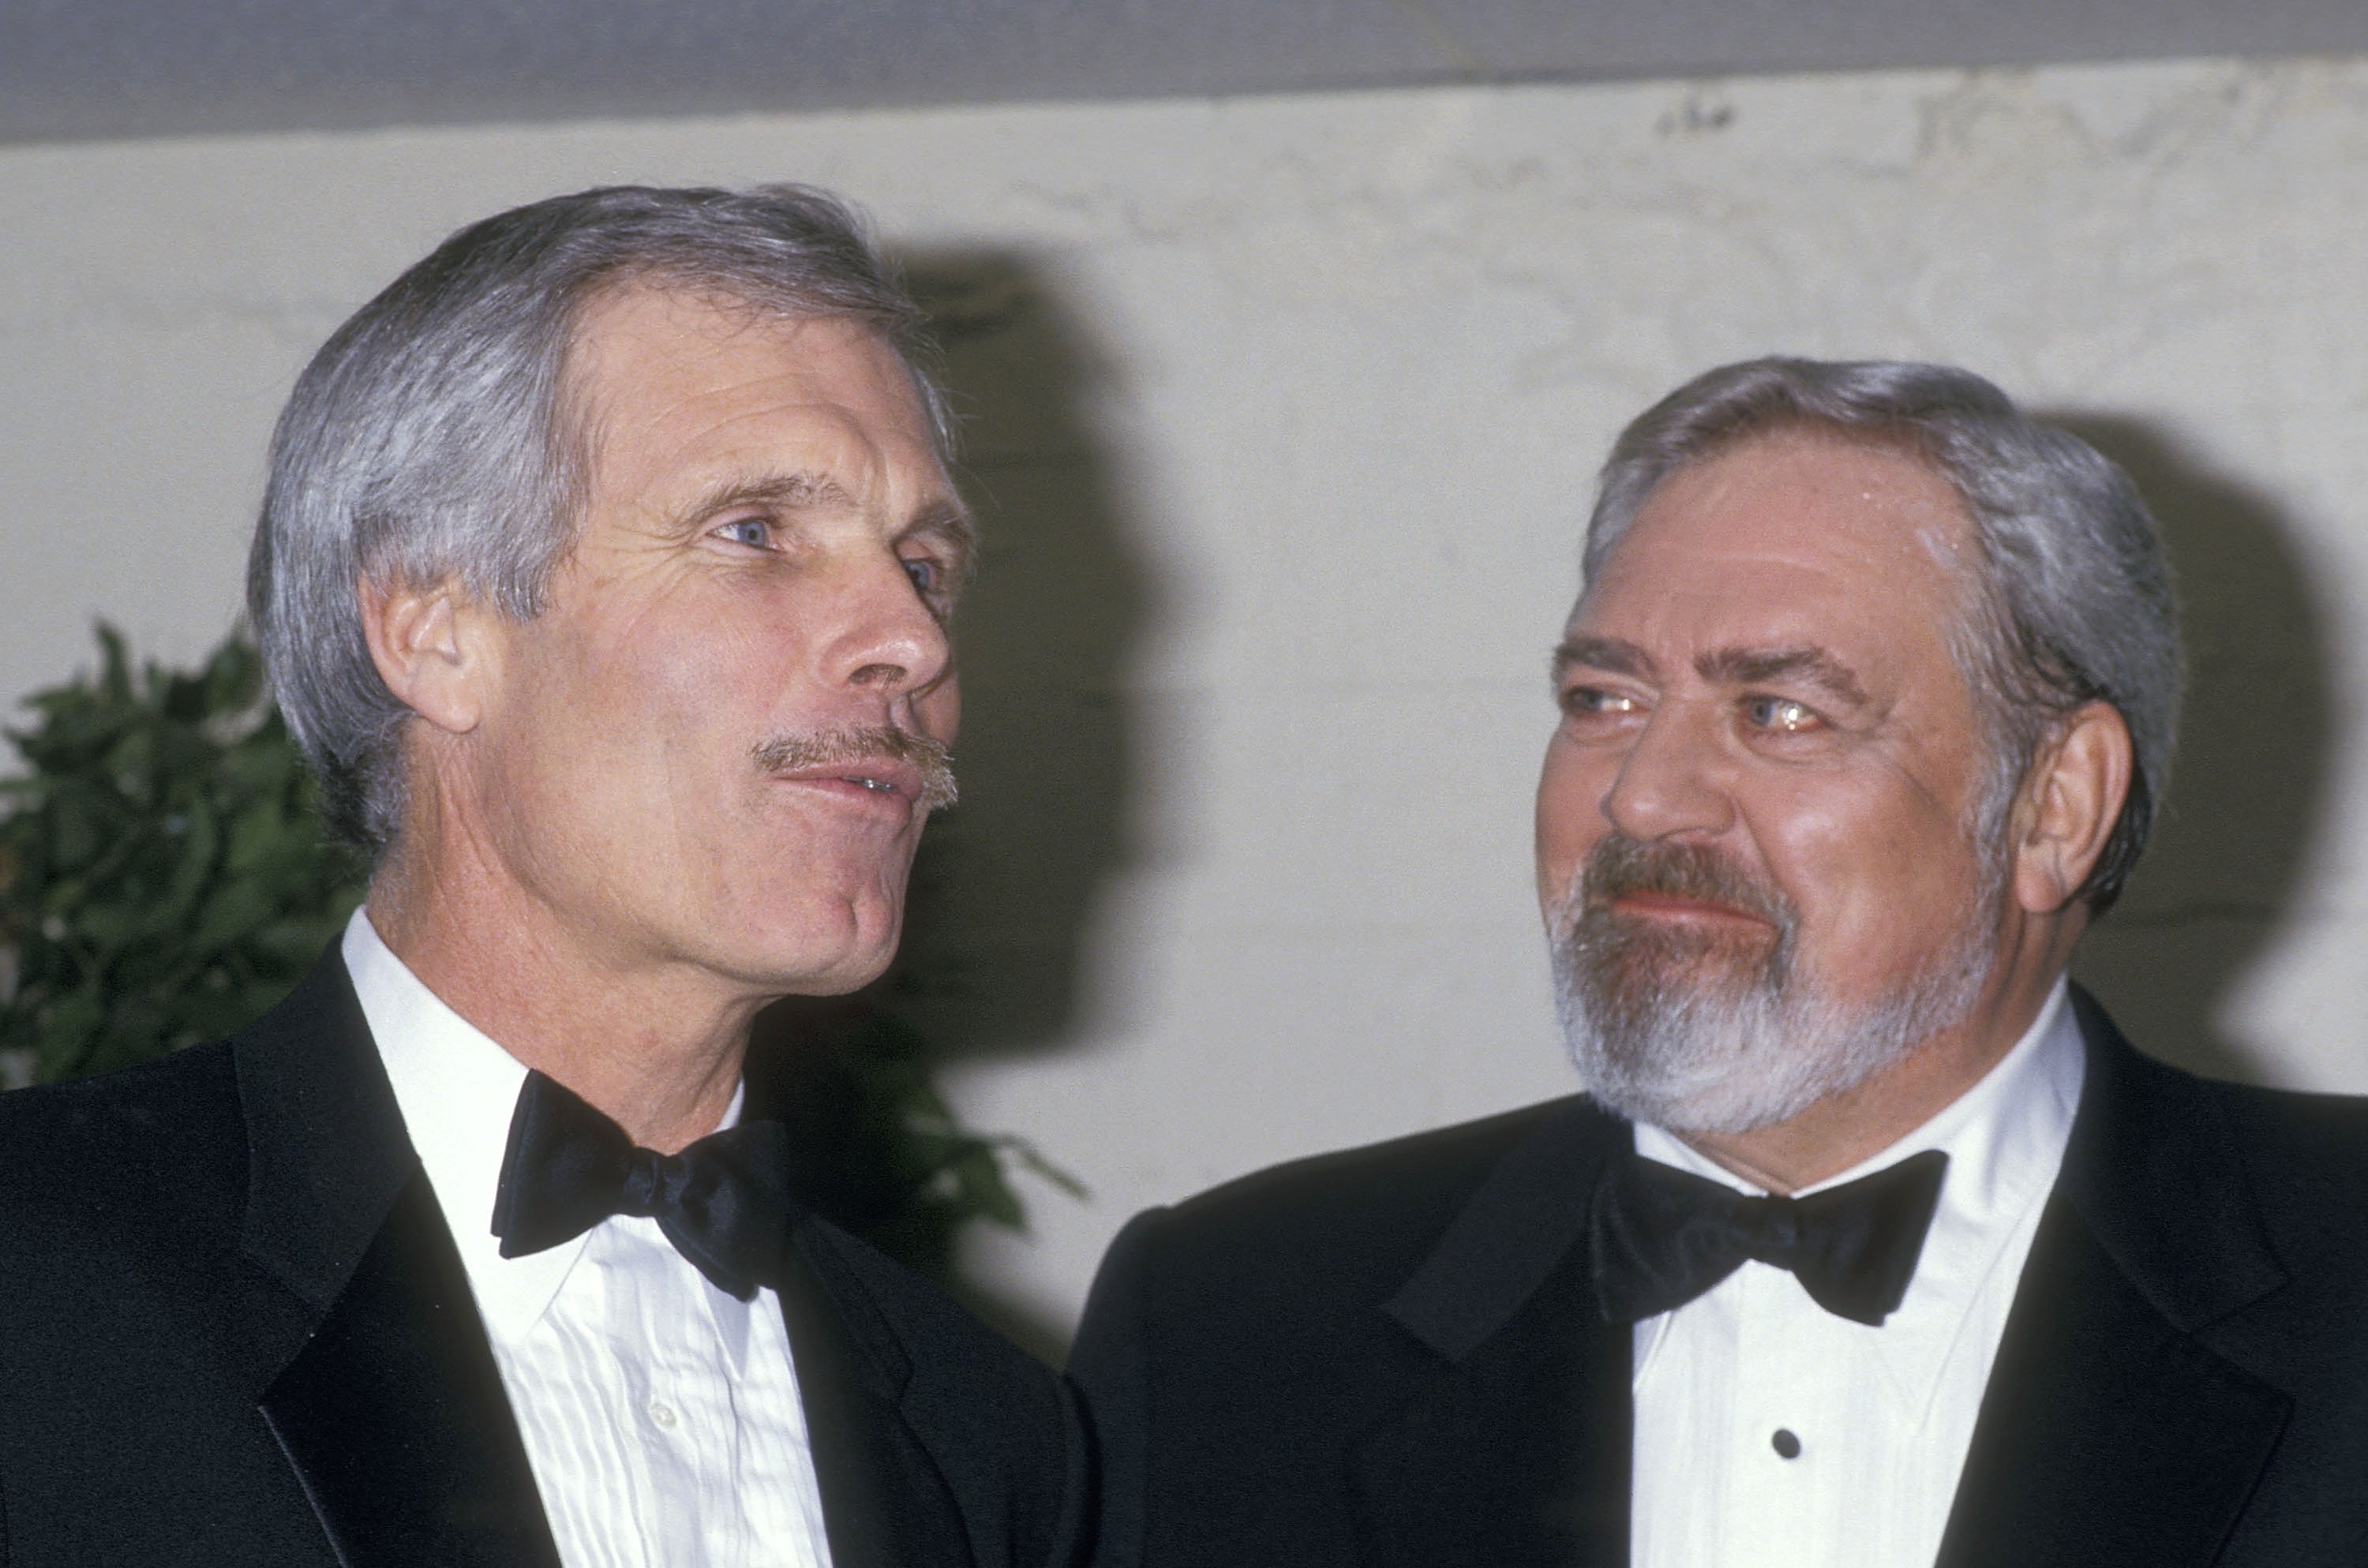 Businessman Ted Turner and actor Raymond Burr at the Eighth Annual National CableACE Awards on January 20, 1987 at the Wiltern Theatre in Los Angeles, California. | Source: Getty Images